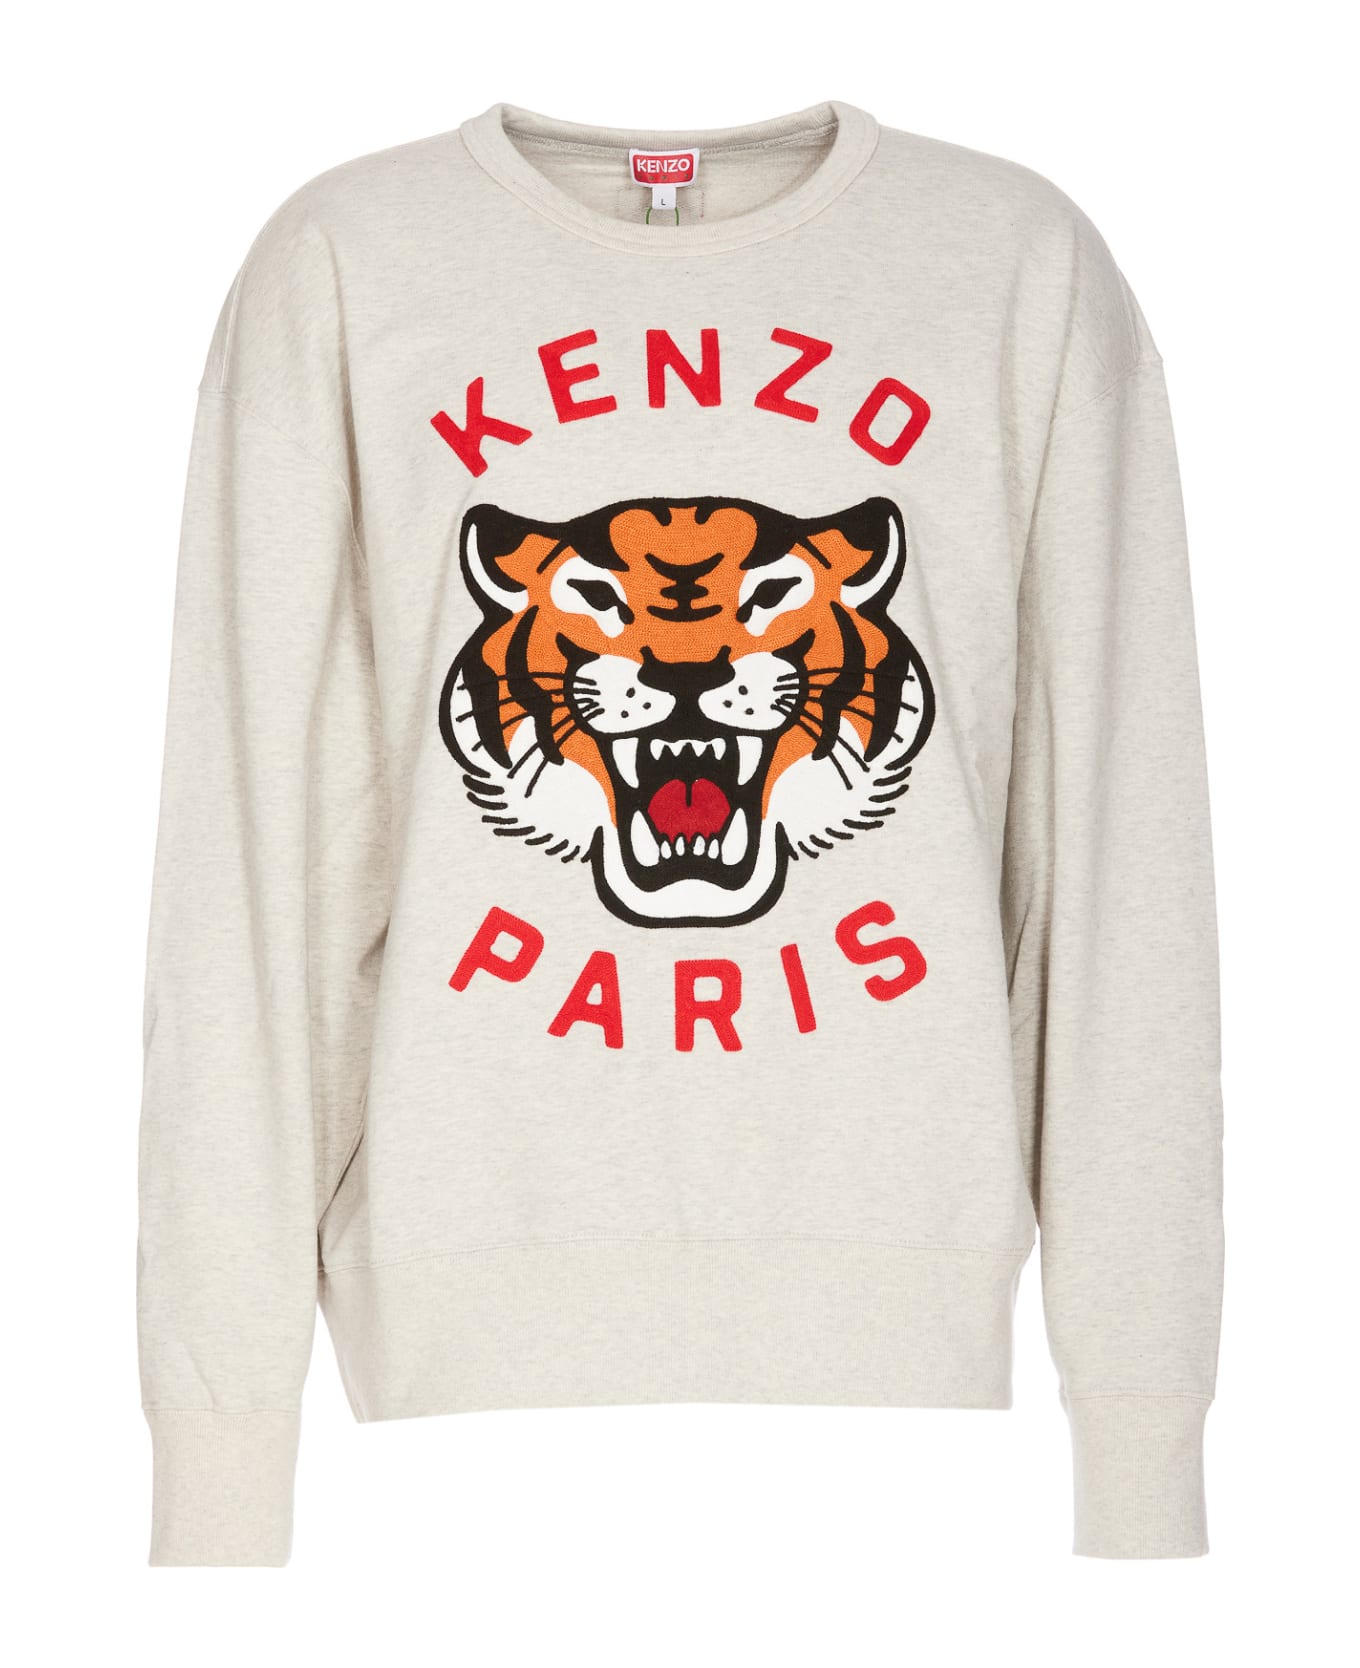 Kenzo Lucky Tiger Embroidered Oversize Sweatshirt - Gris clair フリース